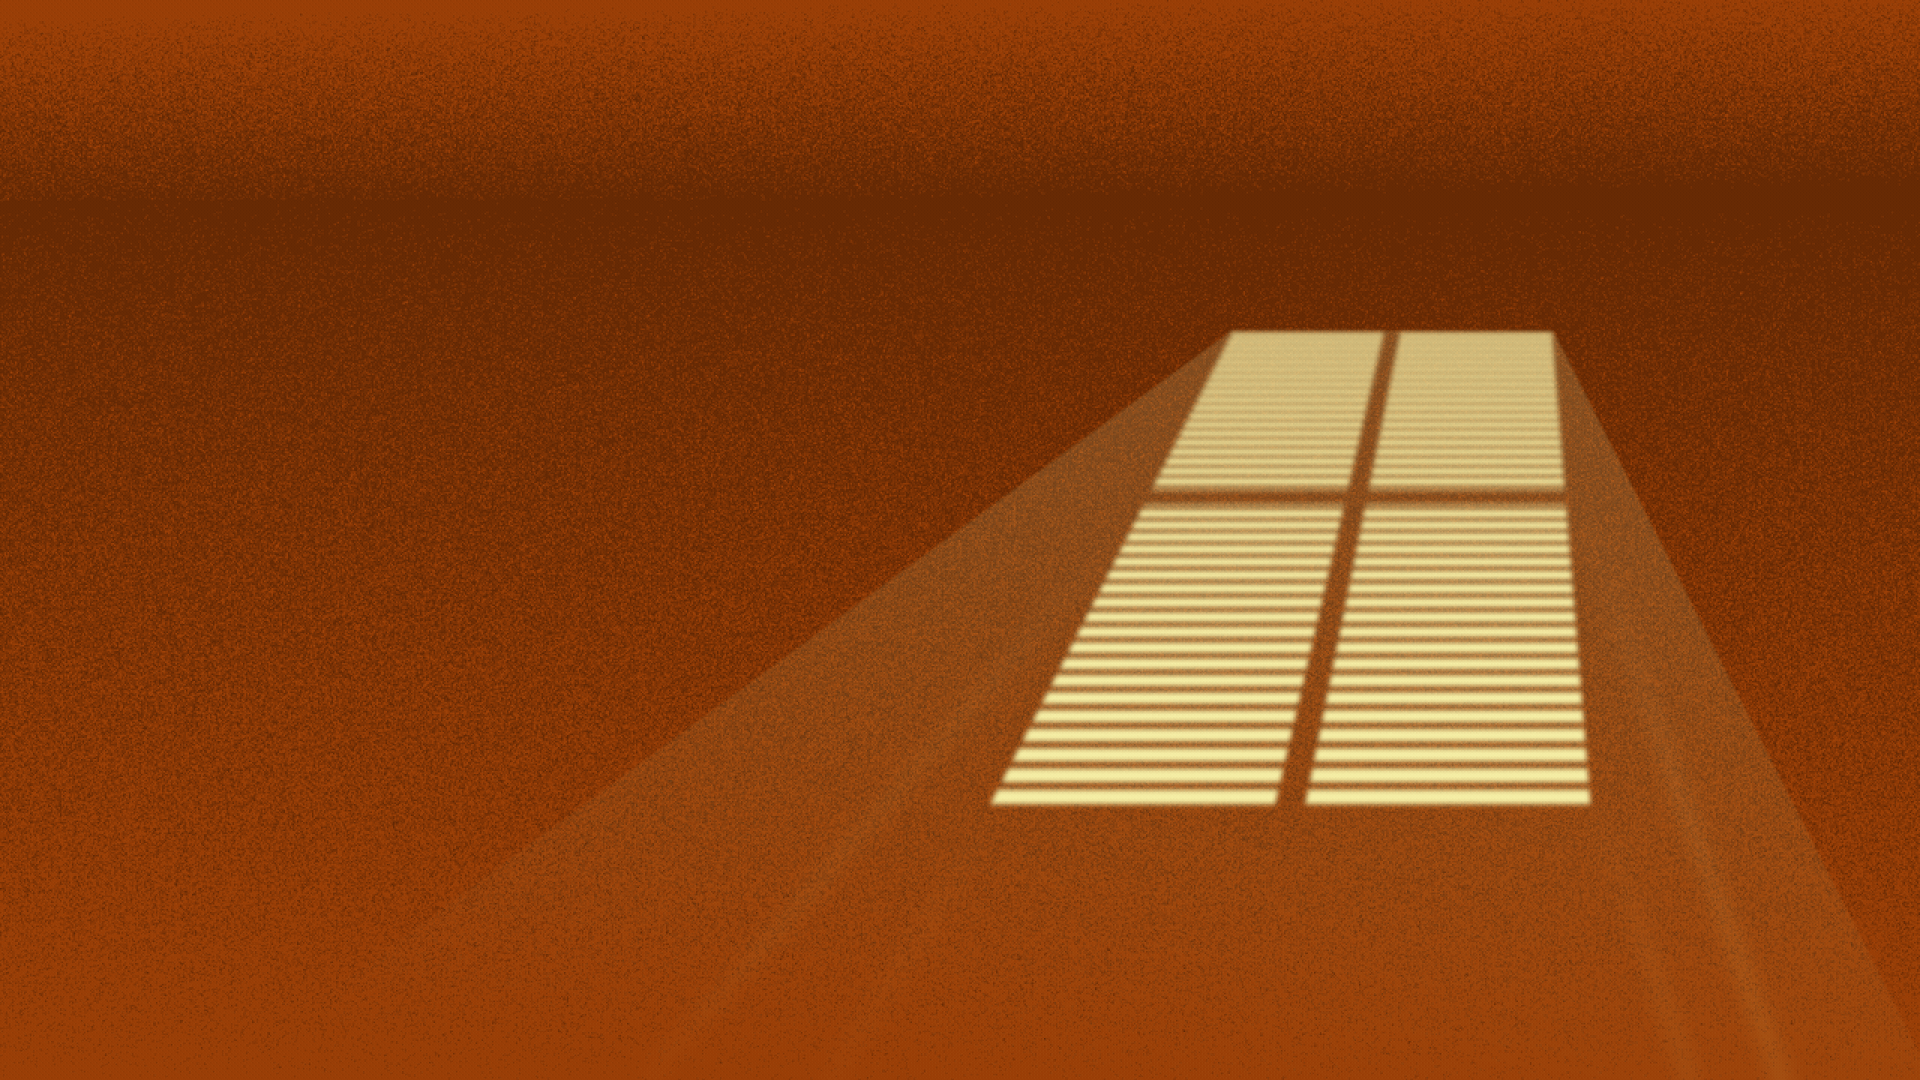 Animated illustration of sunlight hitting the floor through a window with blinds on it, and the window shape changes into an exclamation point.